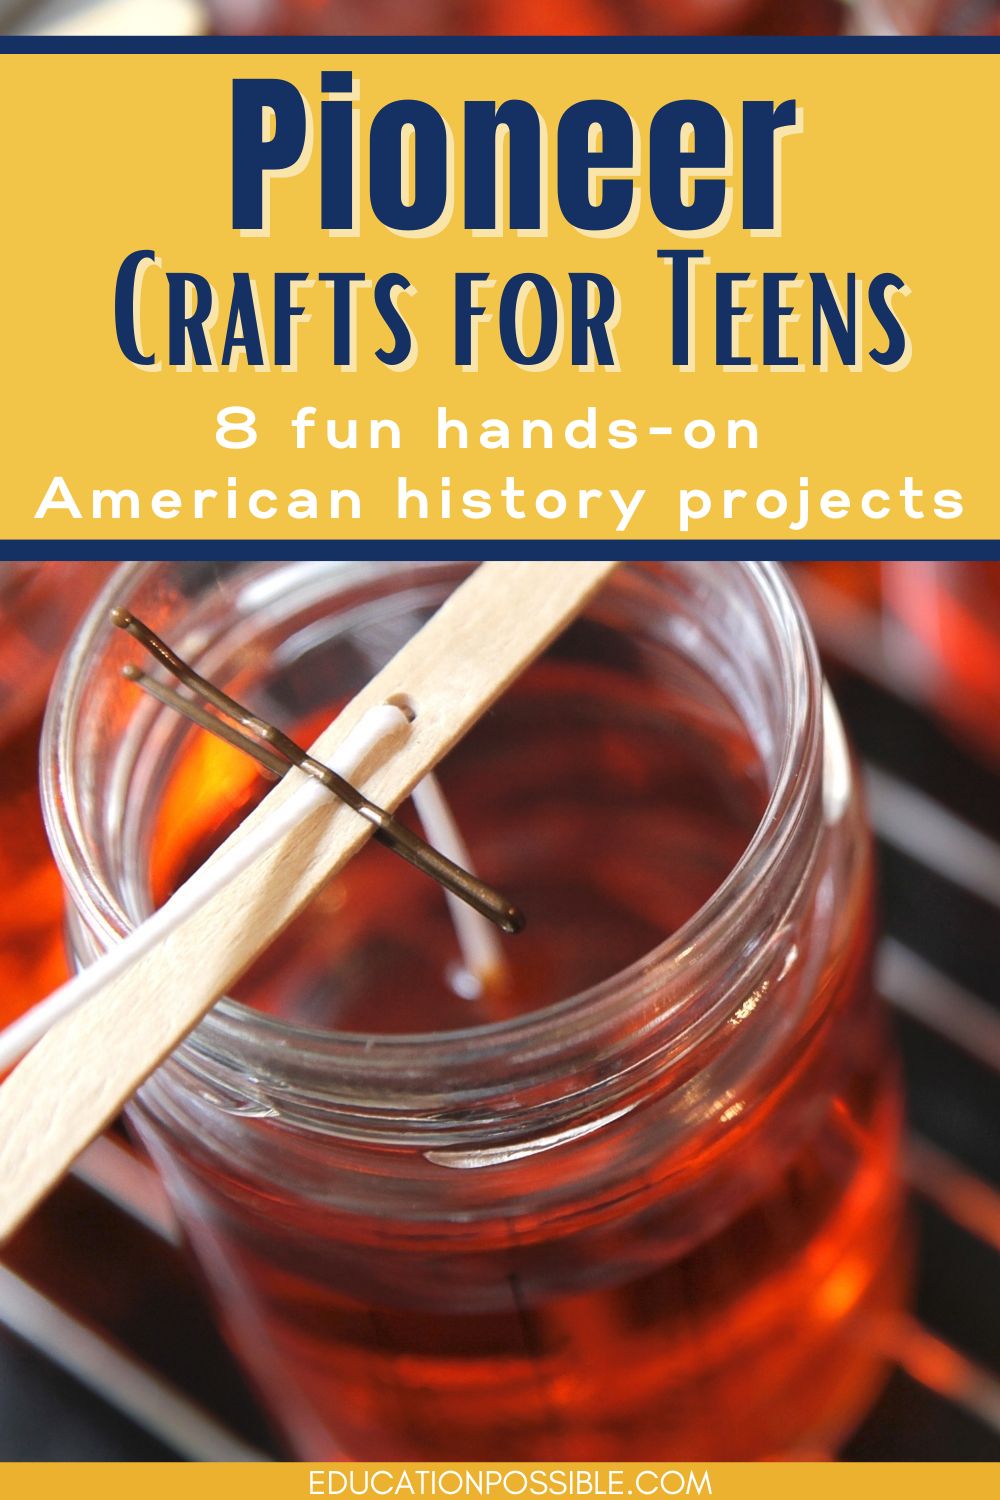 Pioneer Crafts for Teens to Make